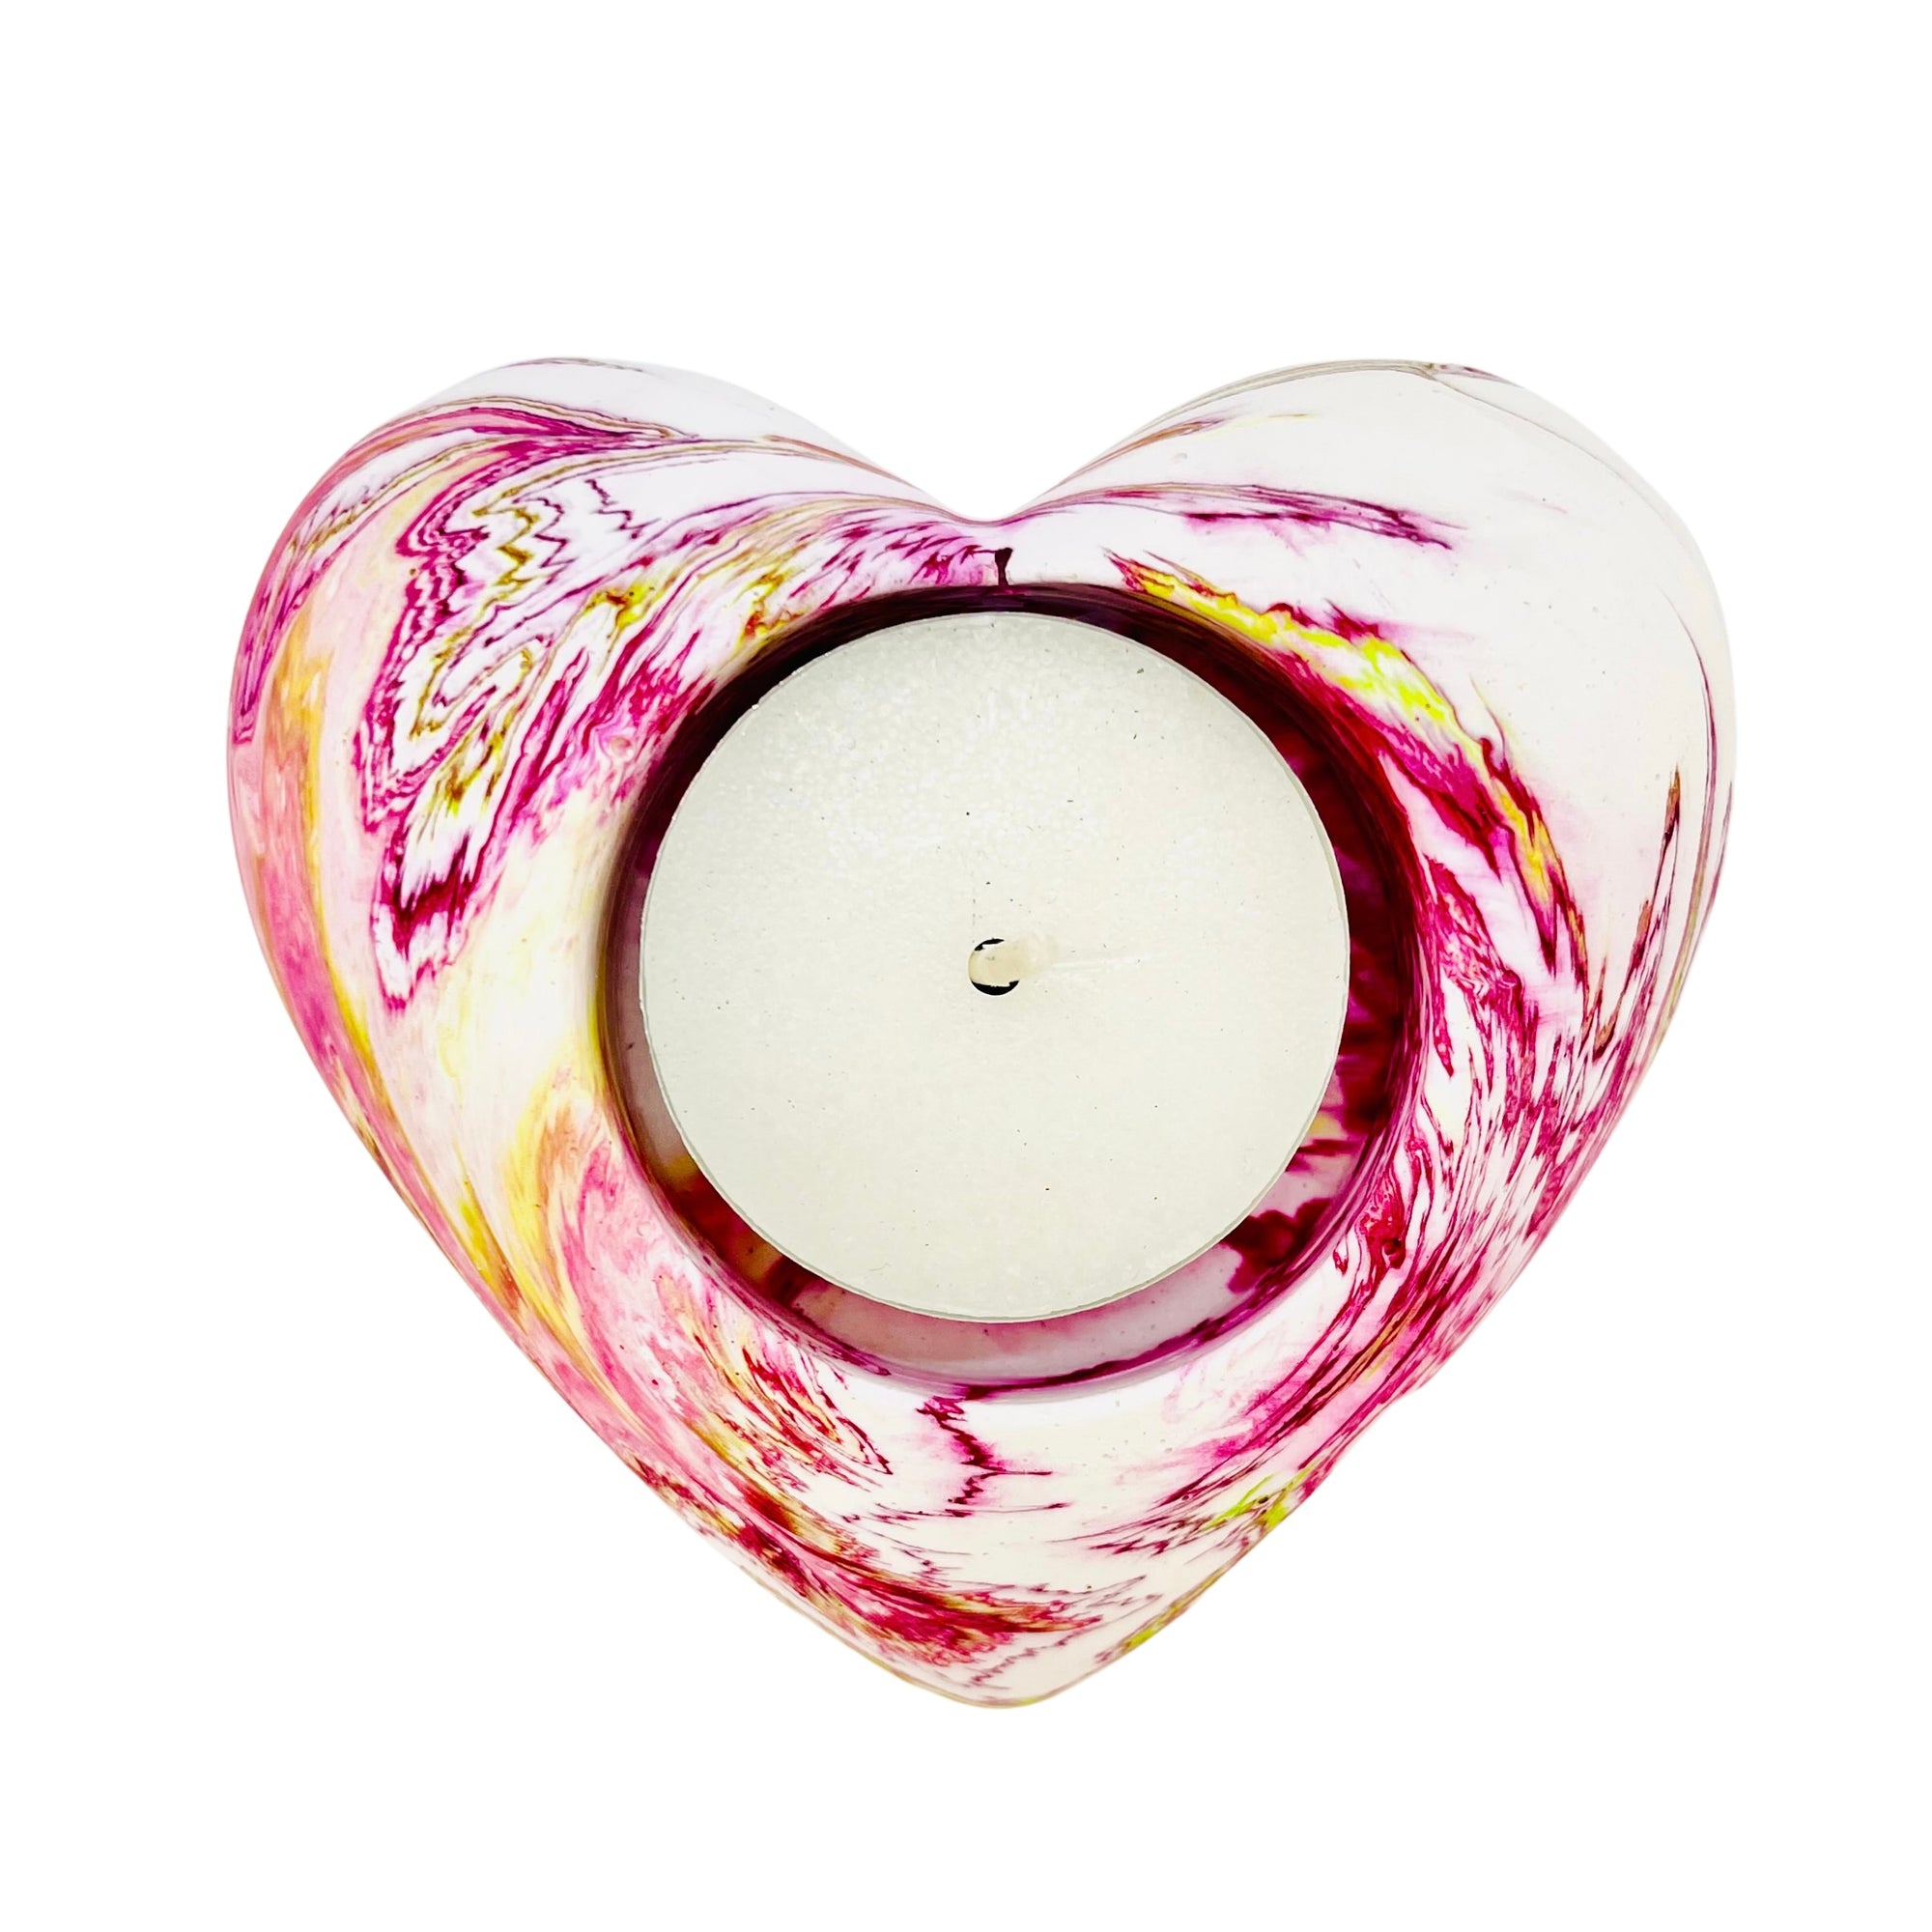 A Jesmonite heart shaped tealight holder measuring 9cm in width marbled with magenta and yellow pigment.